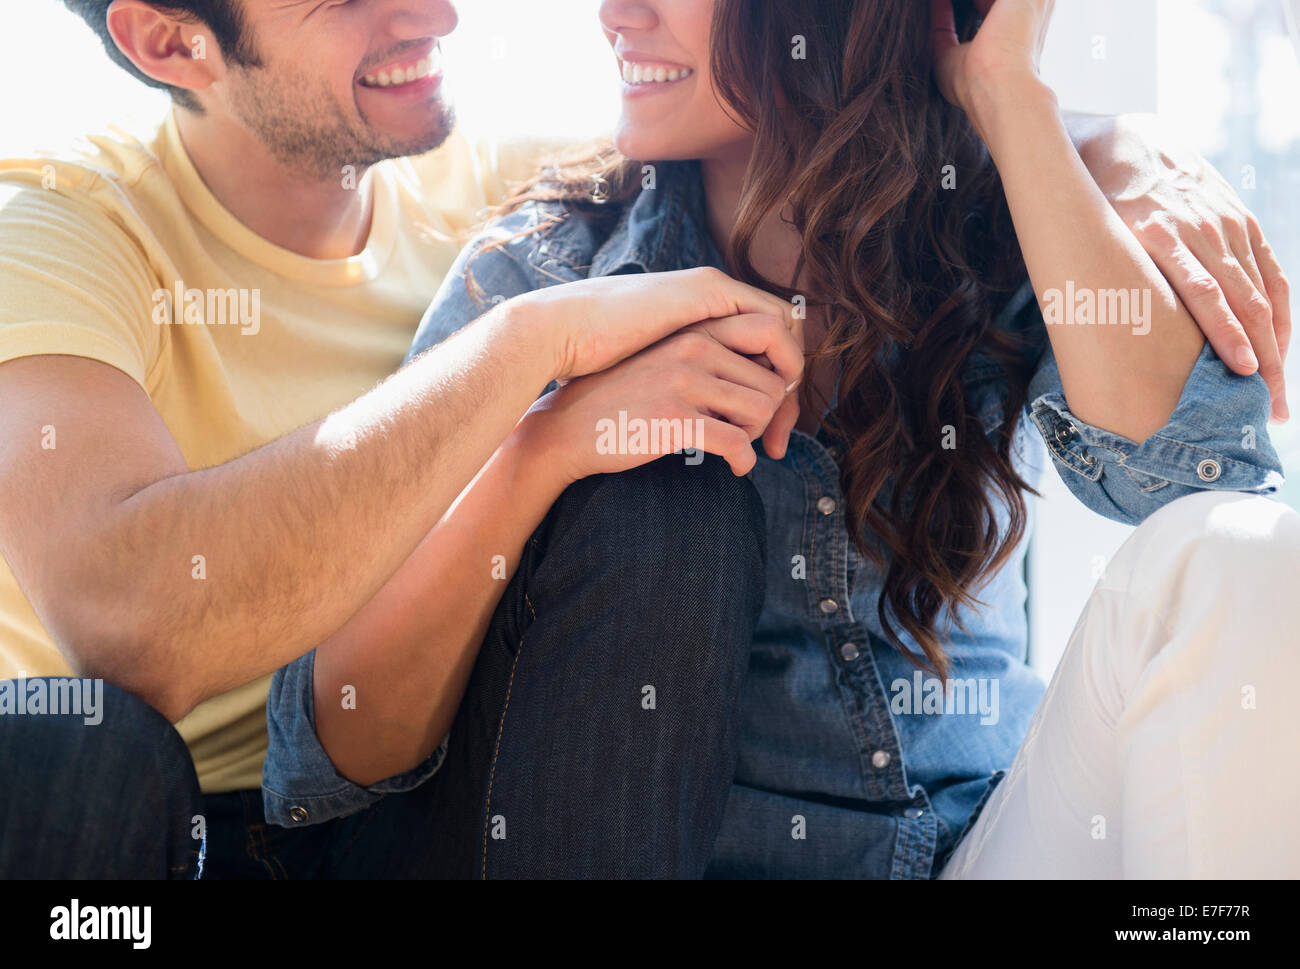 Smiling couple relaxing together Stock Photo